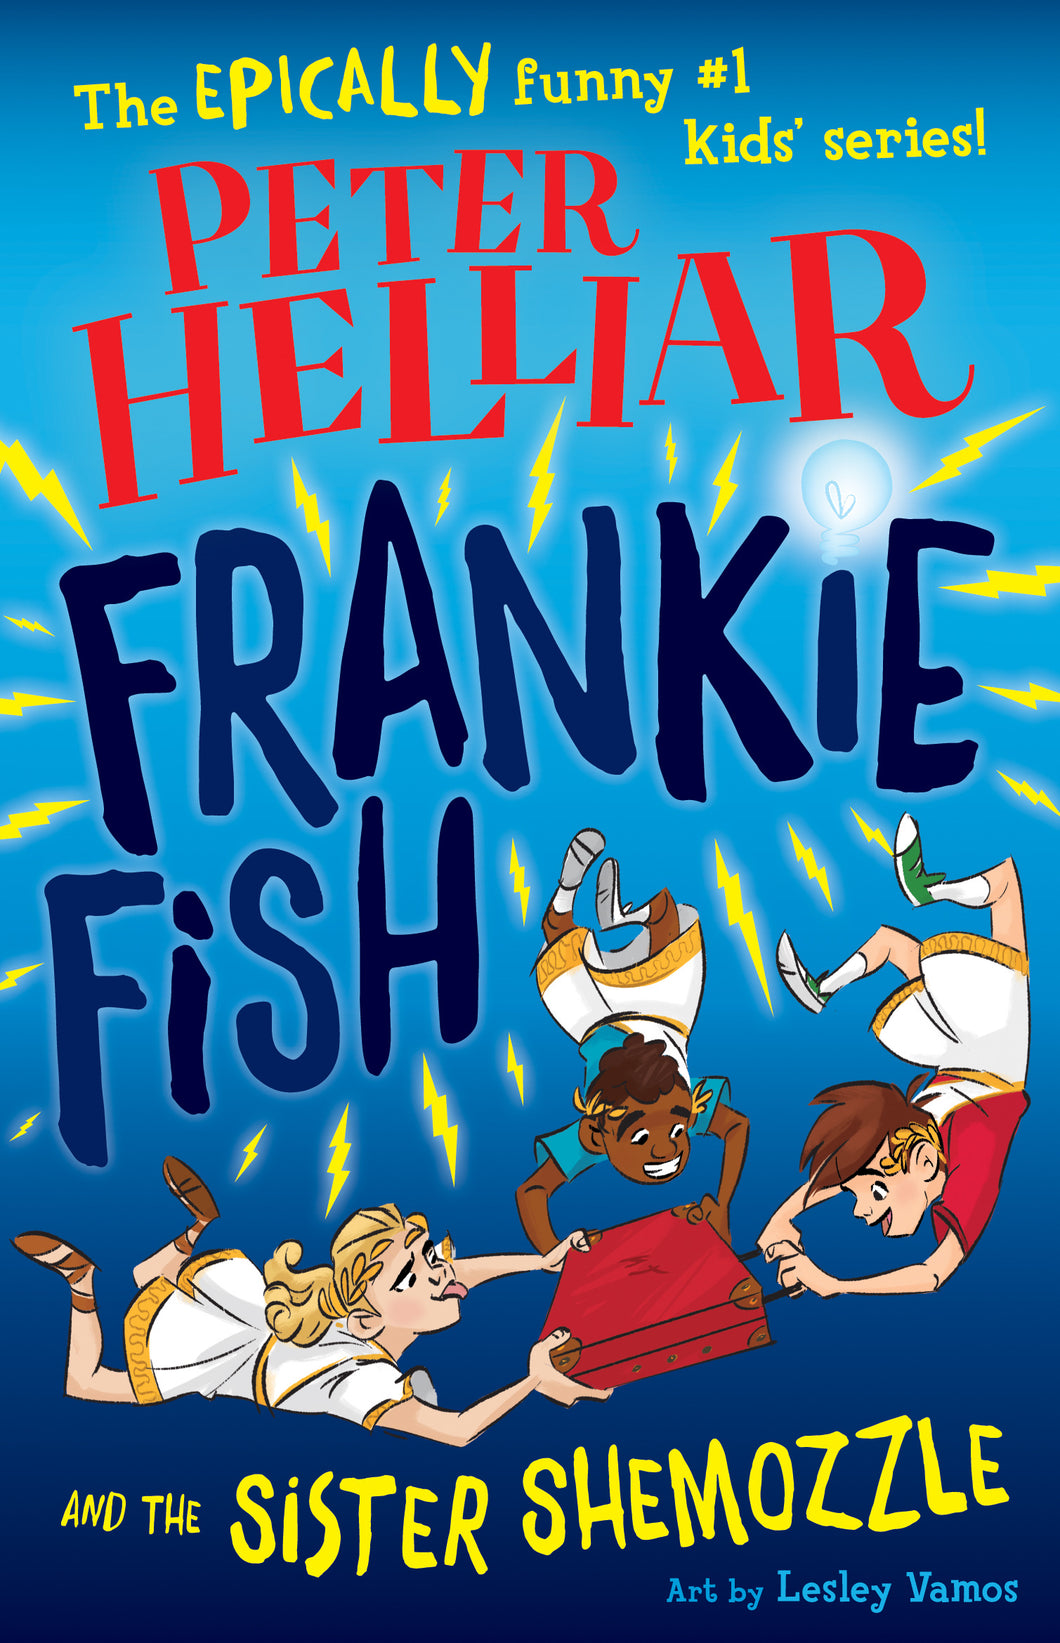 Frankie Fish and the Sister Shemozzle (book 4) by Peter Helliar